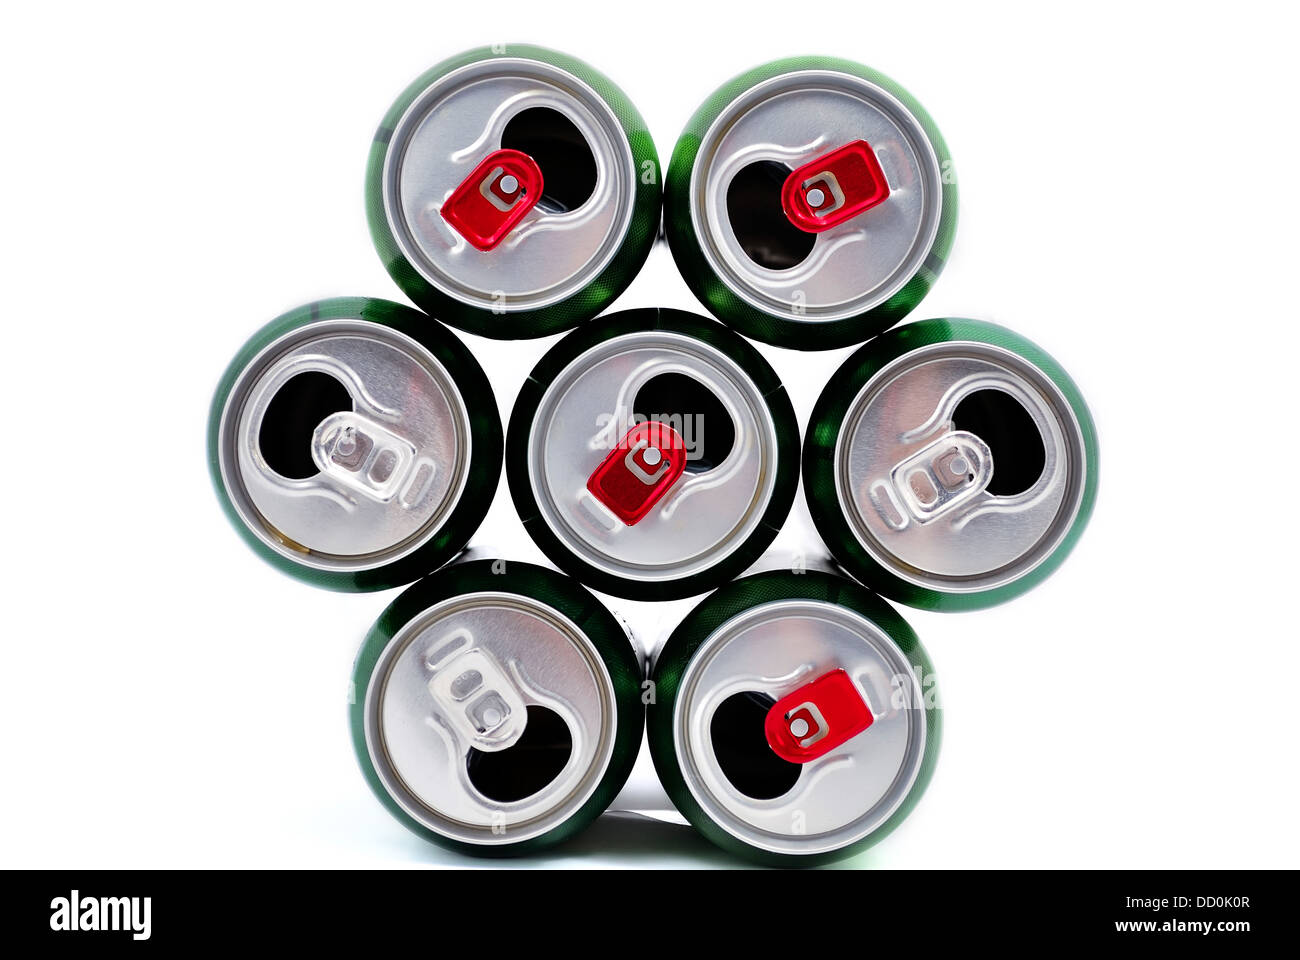 beer cans Stock Photo